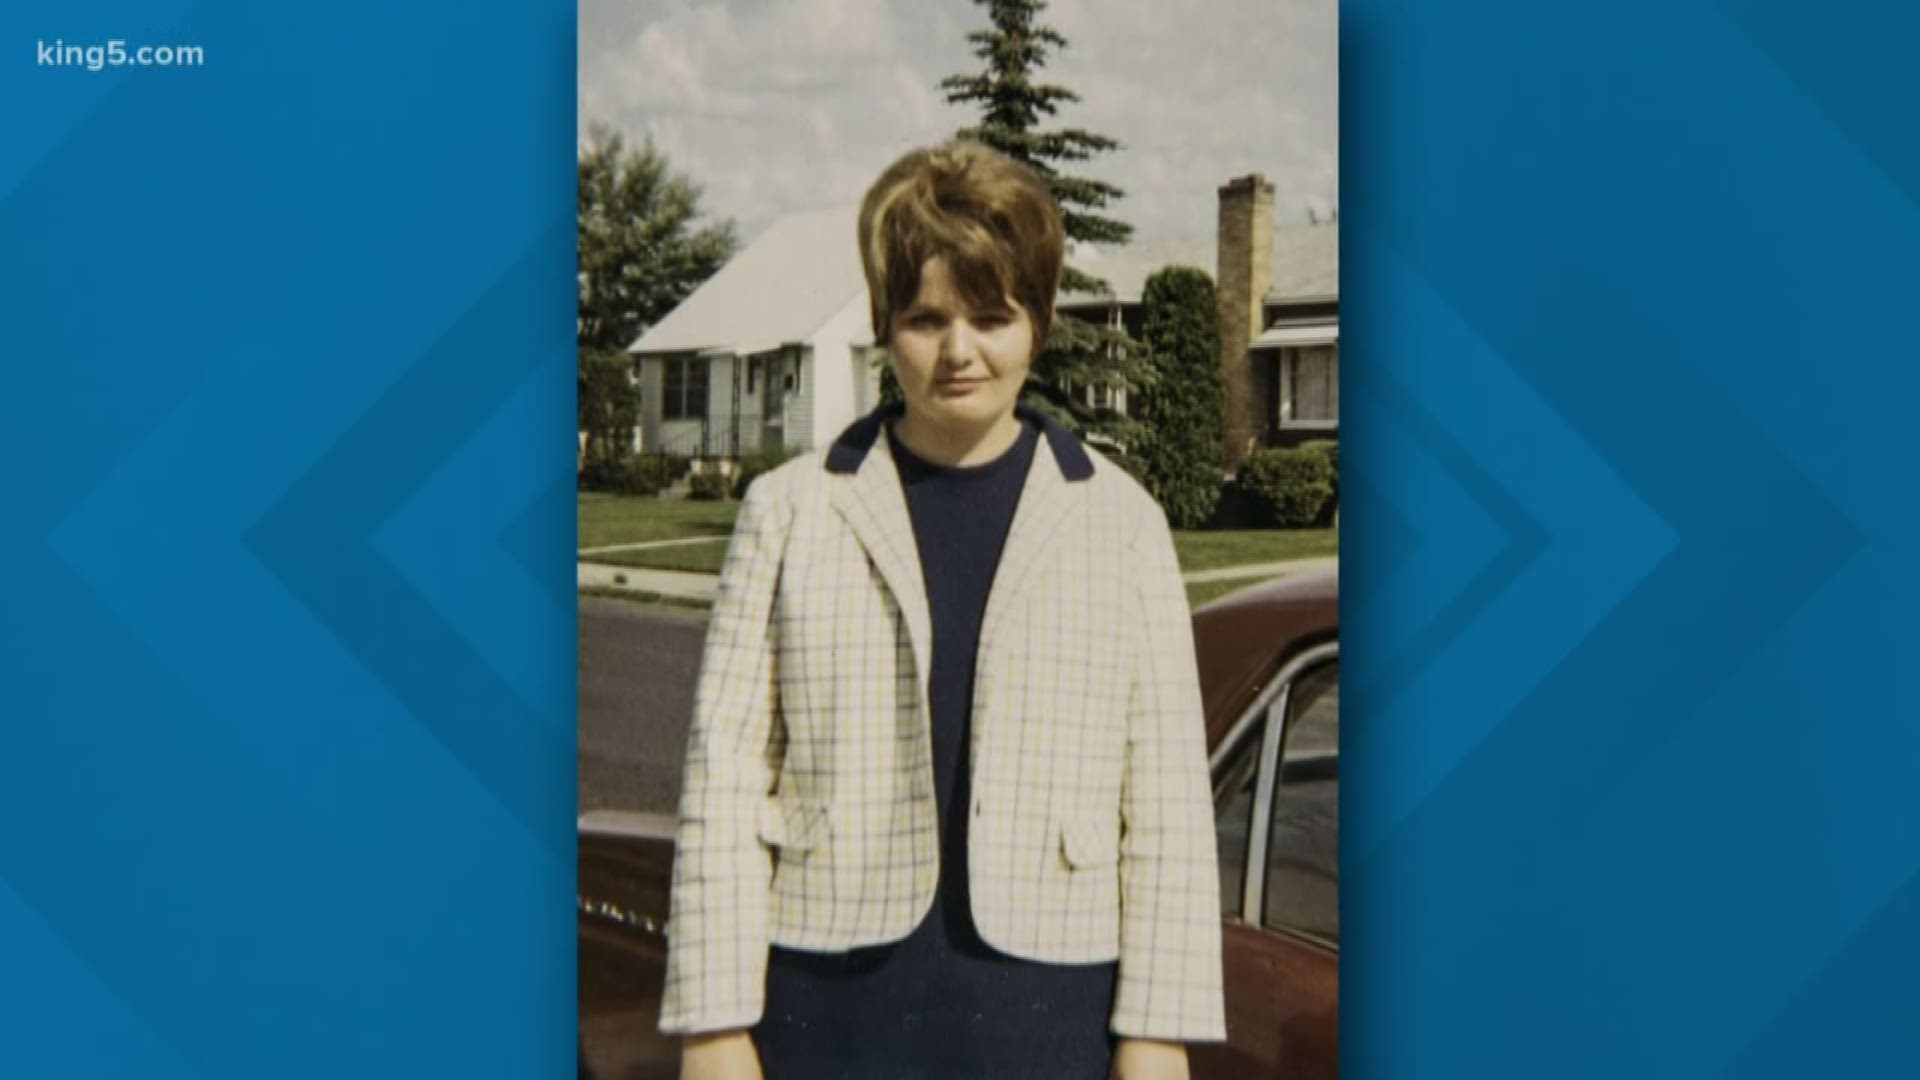 DNA has done it again. This time it has solved a Seattle cold case from 1967. New technology and DNA databases are goldmines for departments trying to solve cold cases. This one goes back almost 52 years.